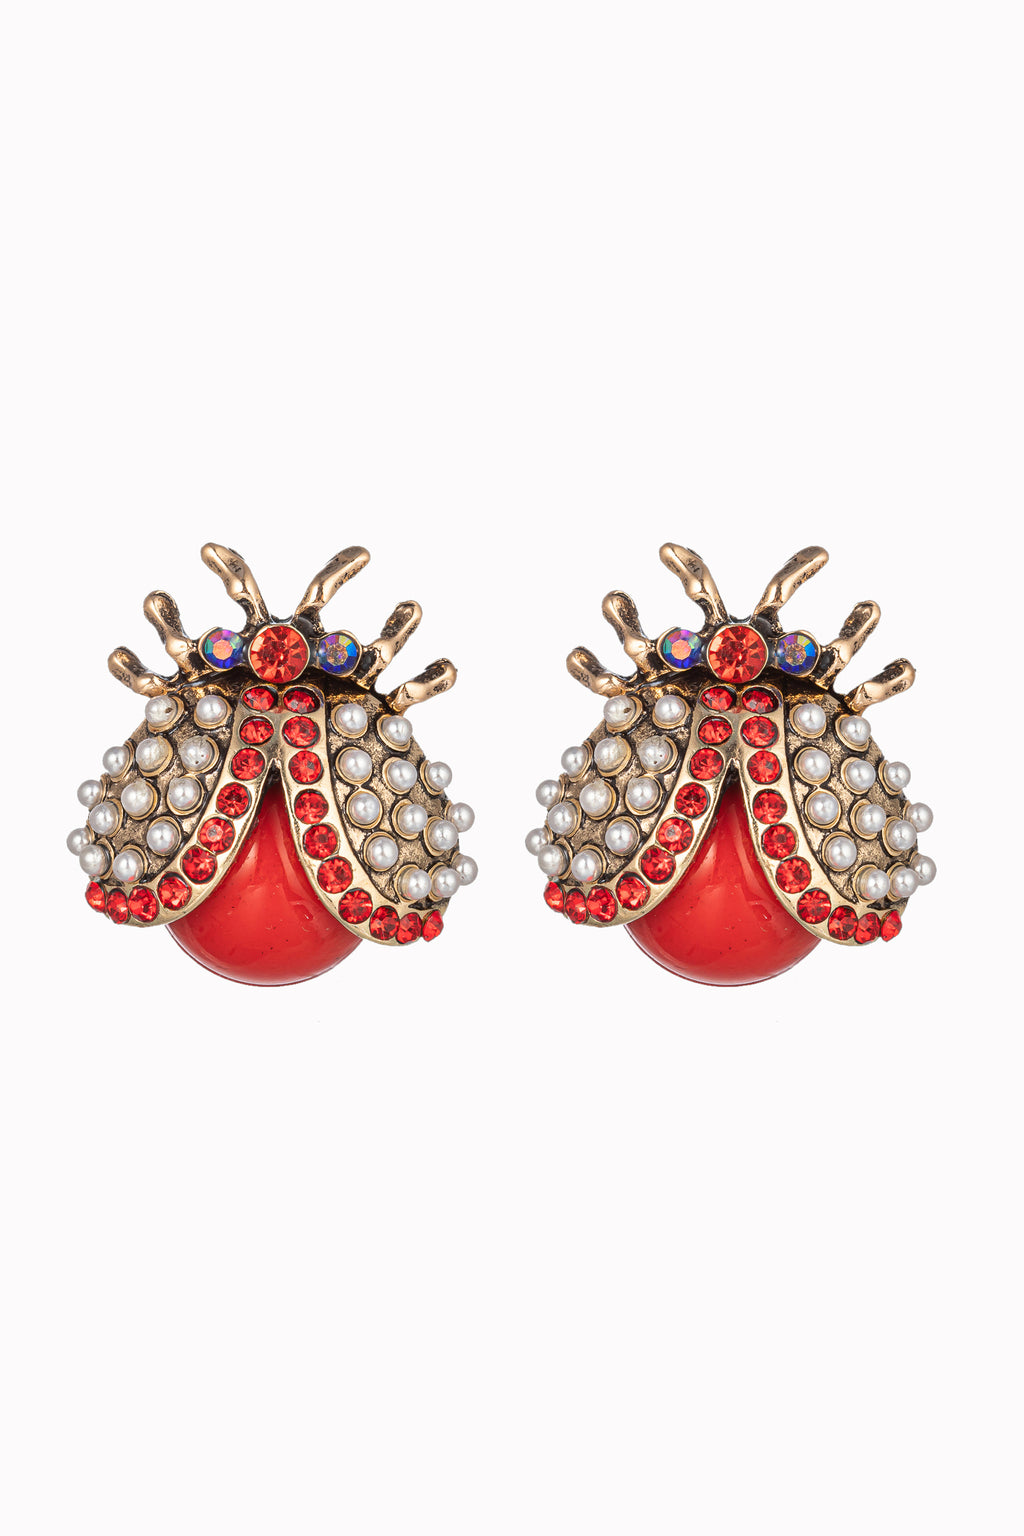 Gold tone alloy red beetle stud earrings with red glass crystals.